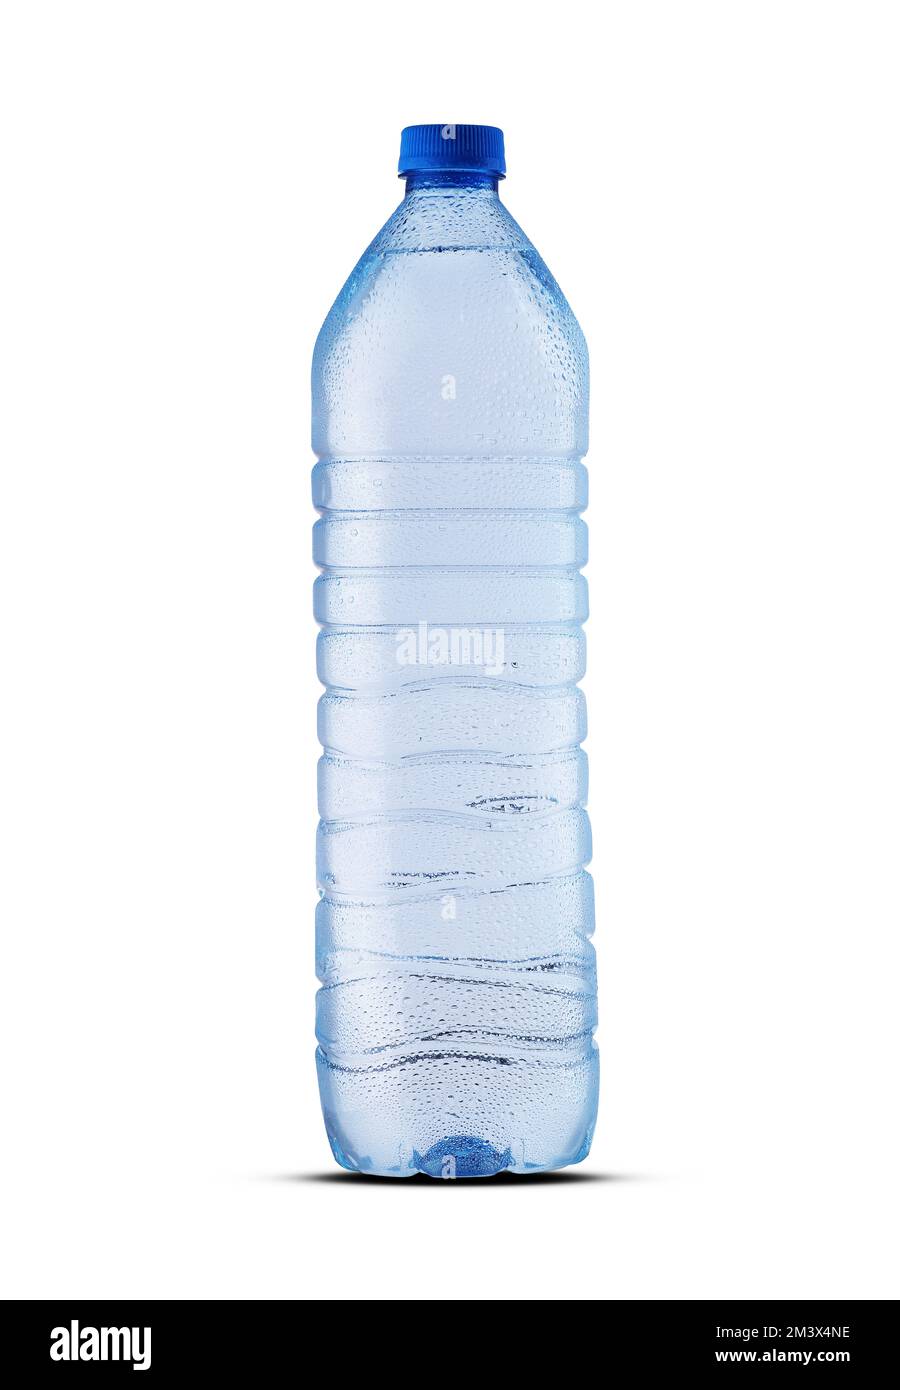 https://c8.alamy.com/comp/2M3X4NE/large-plastic-bottle-with-mineral-water-isolated-on-white-2M3X4NE.jpg